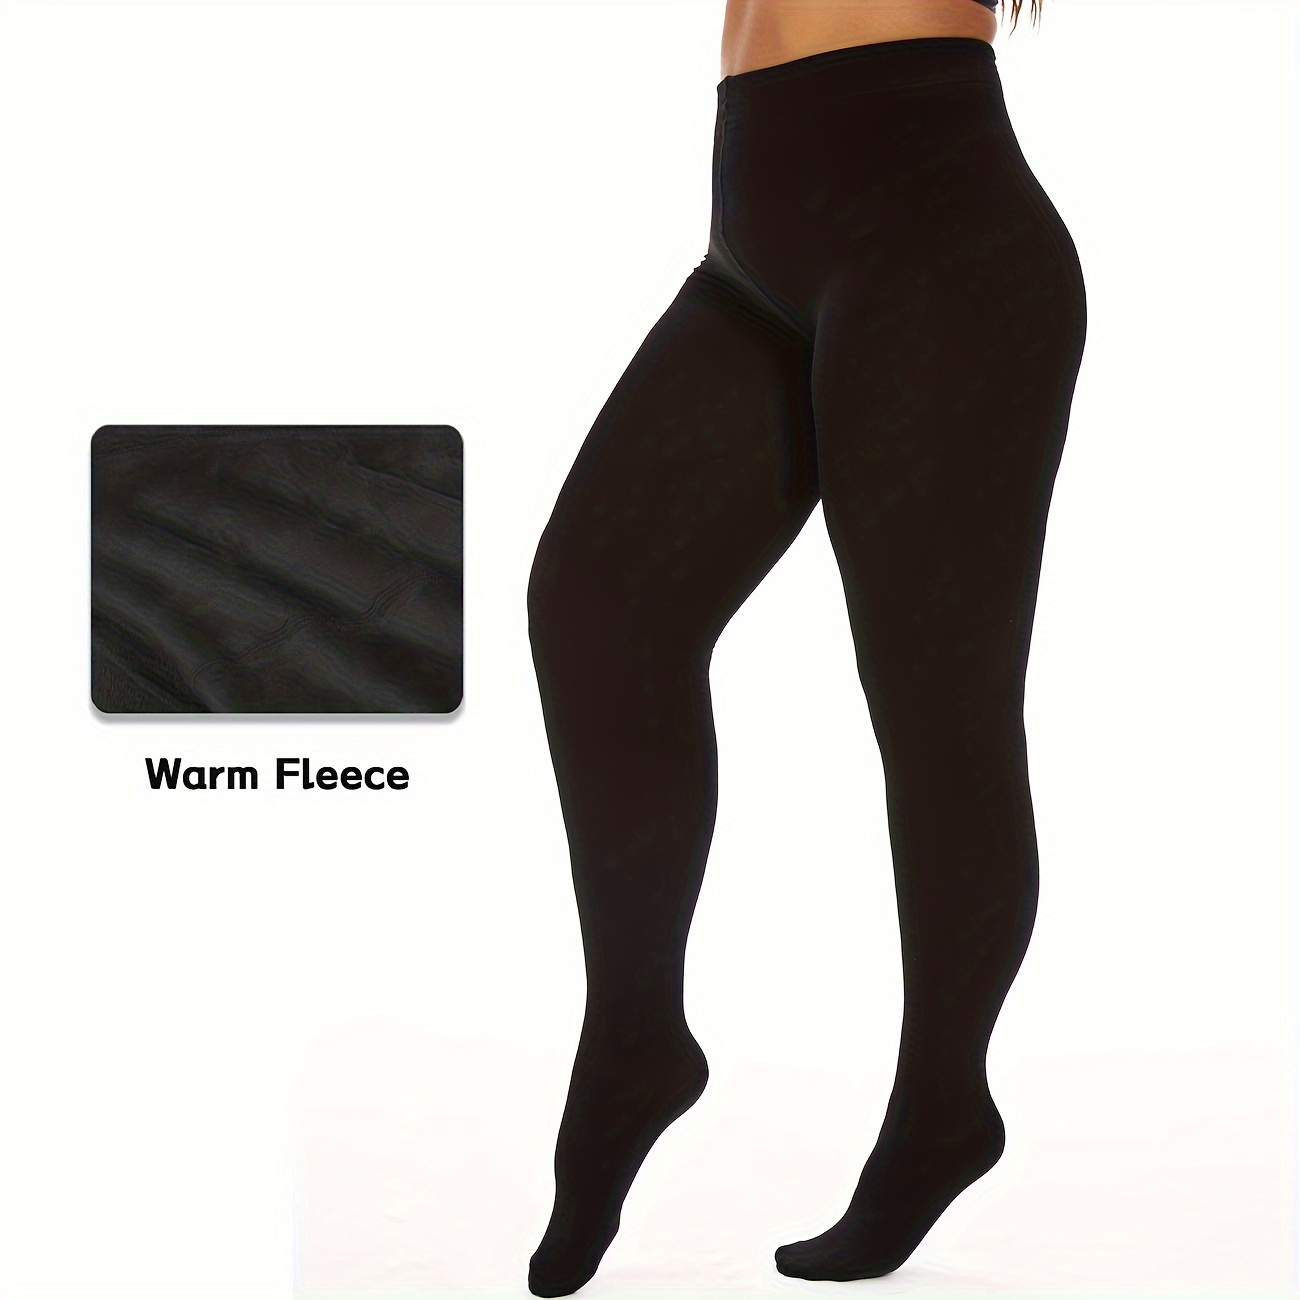 High Waisted Fleece Lined Tights for Women | Winter Warm Pantyhose